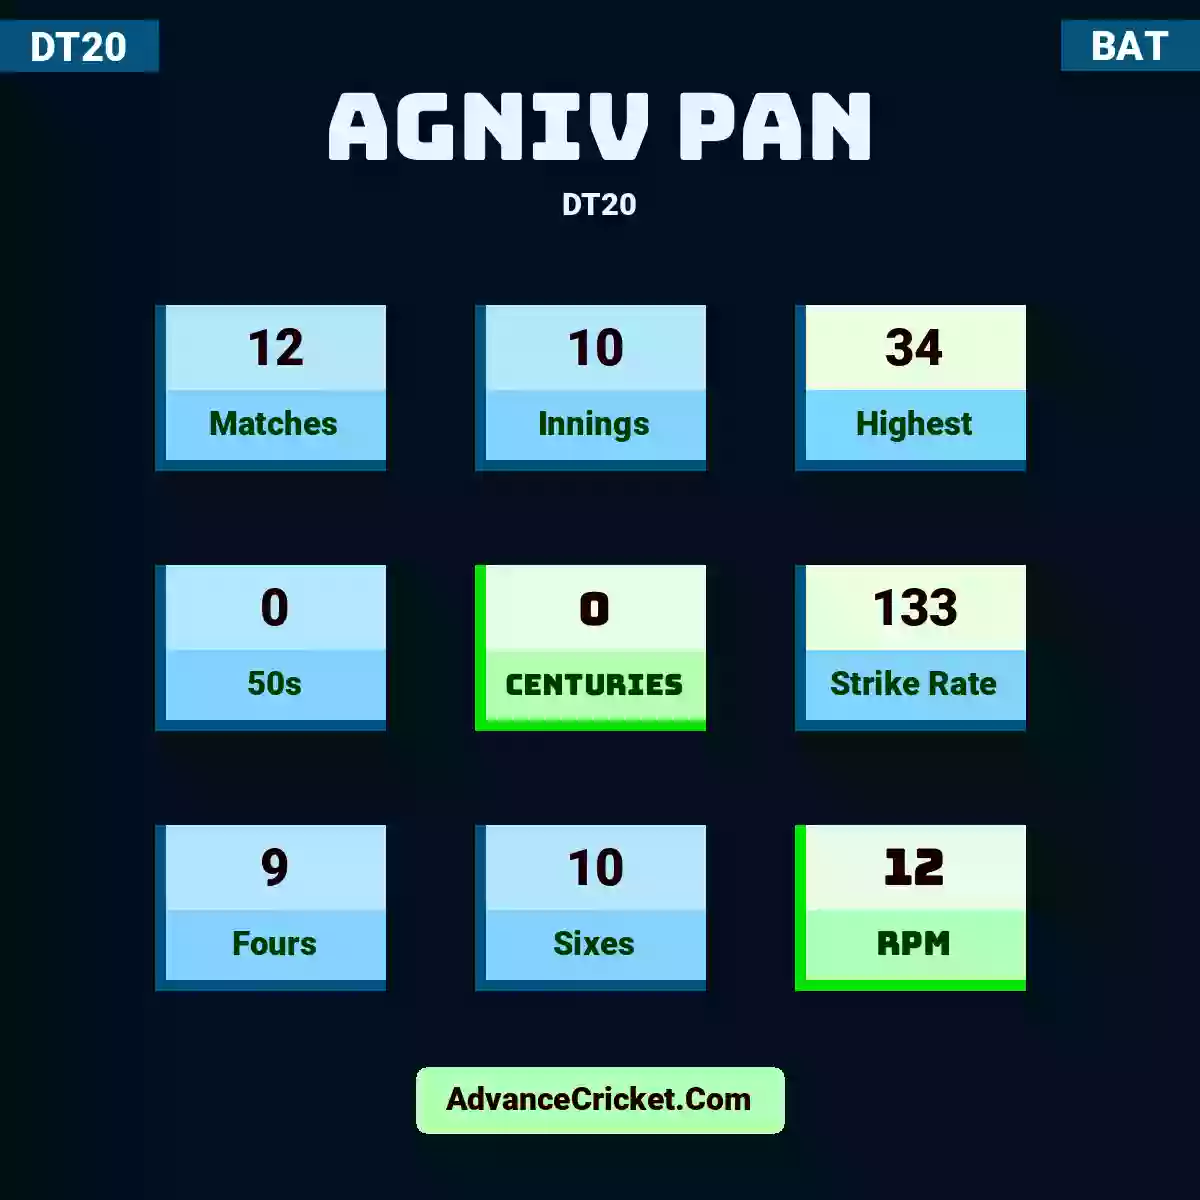 Agniv Pan DT20 , Agniv Pan played 12 matches, scored 34 runs as highest, 0 half-centuries, and 0 centuries, with a strike rate of 133. A.Pan hit 9 fours and 10 sixes, with an RPM of 12.